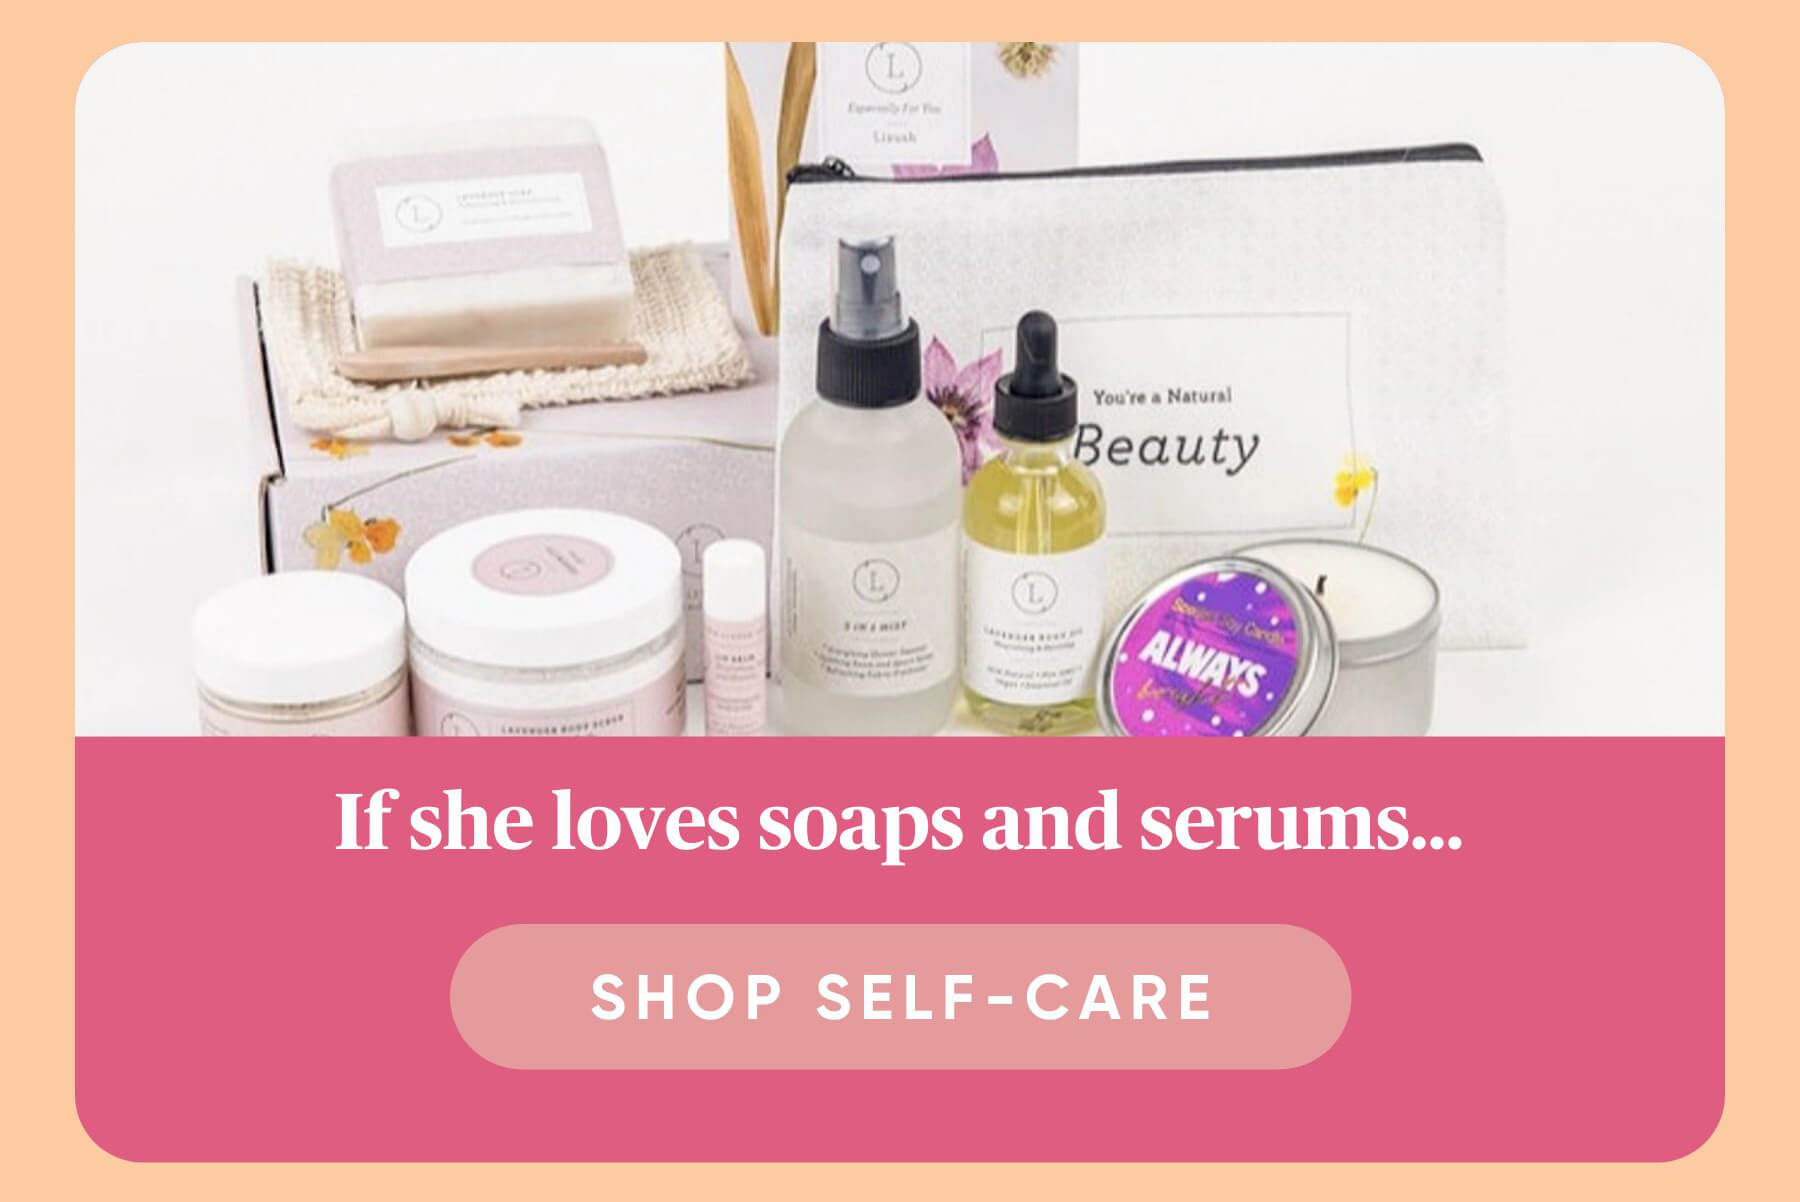 If she loves soaps and serums Shop Self-Care